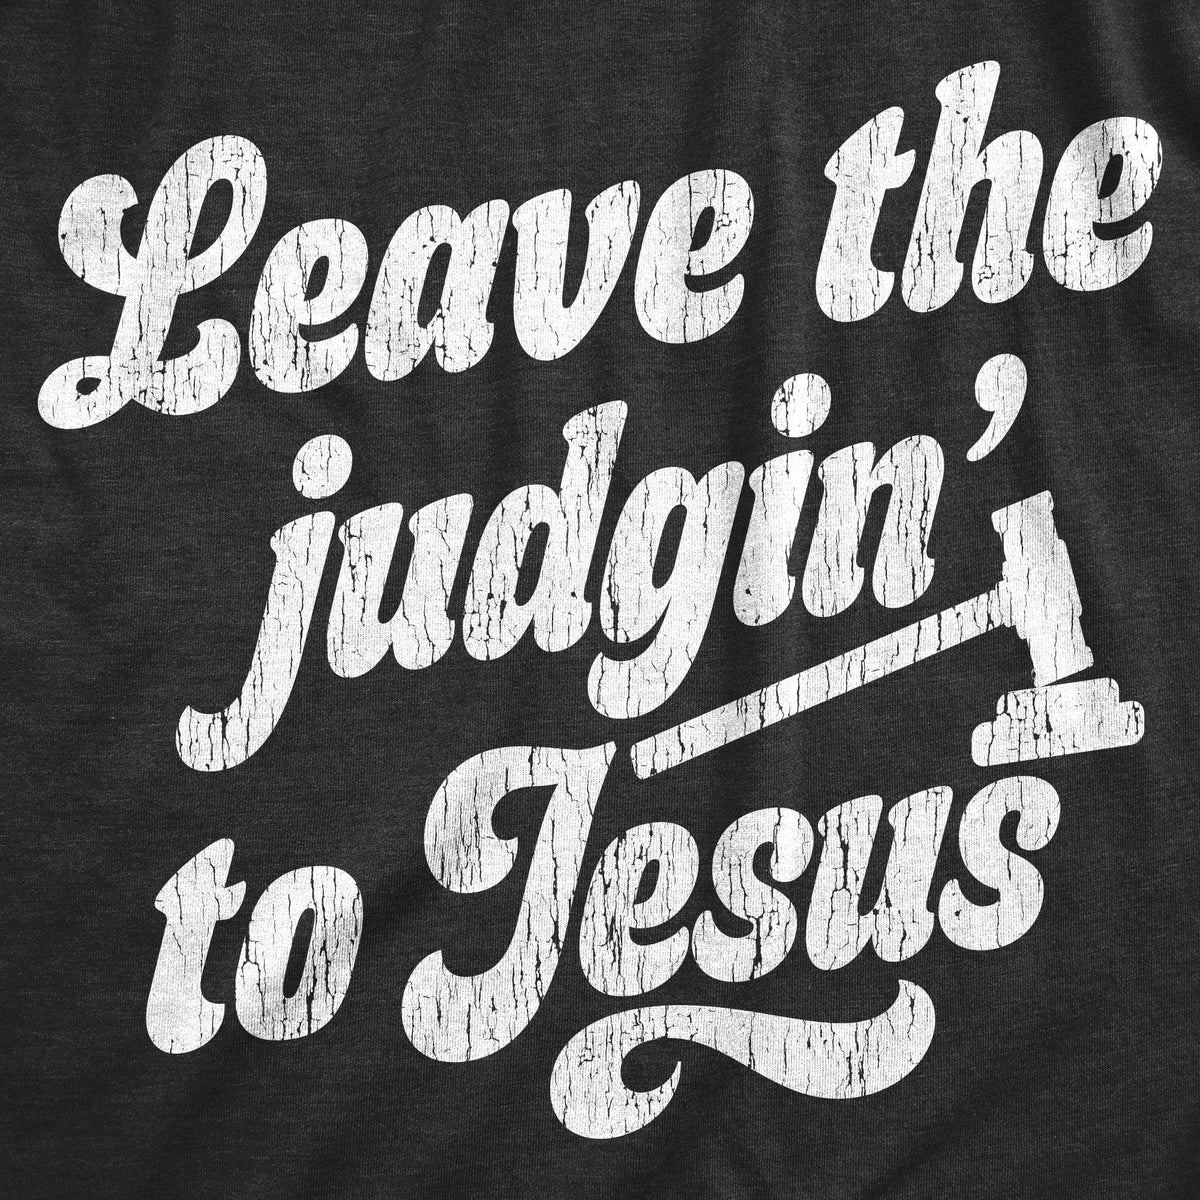 Leave The Judgin To Jesus Women&#39;s Tshirt  -  Crazy Dog T-Shirts